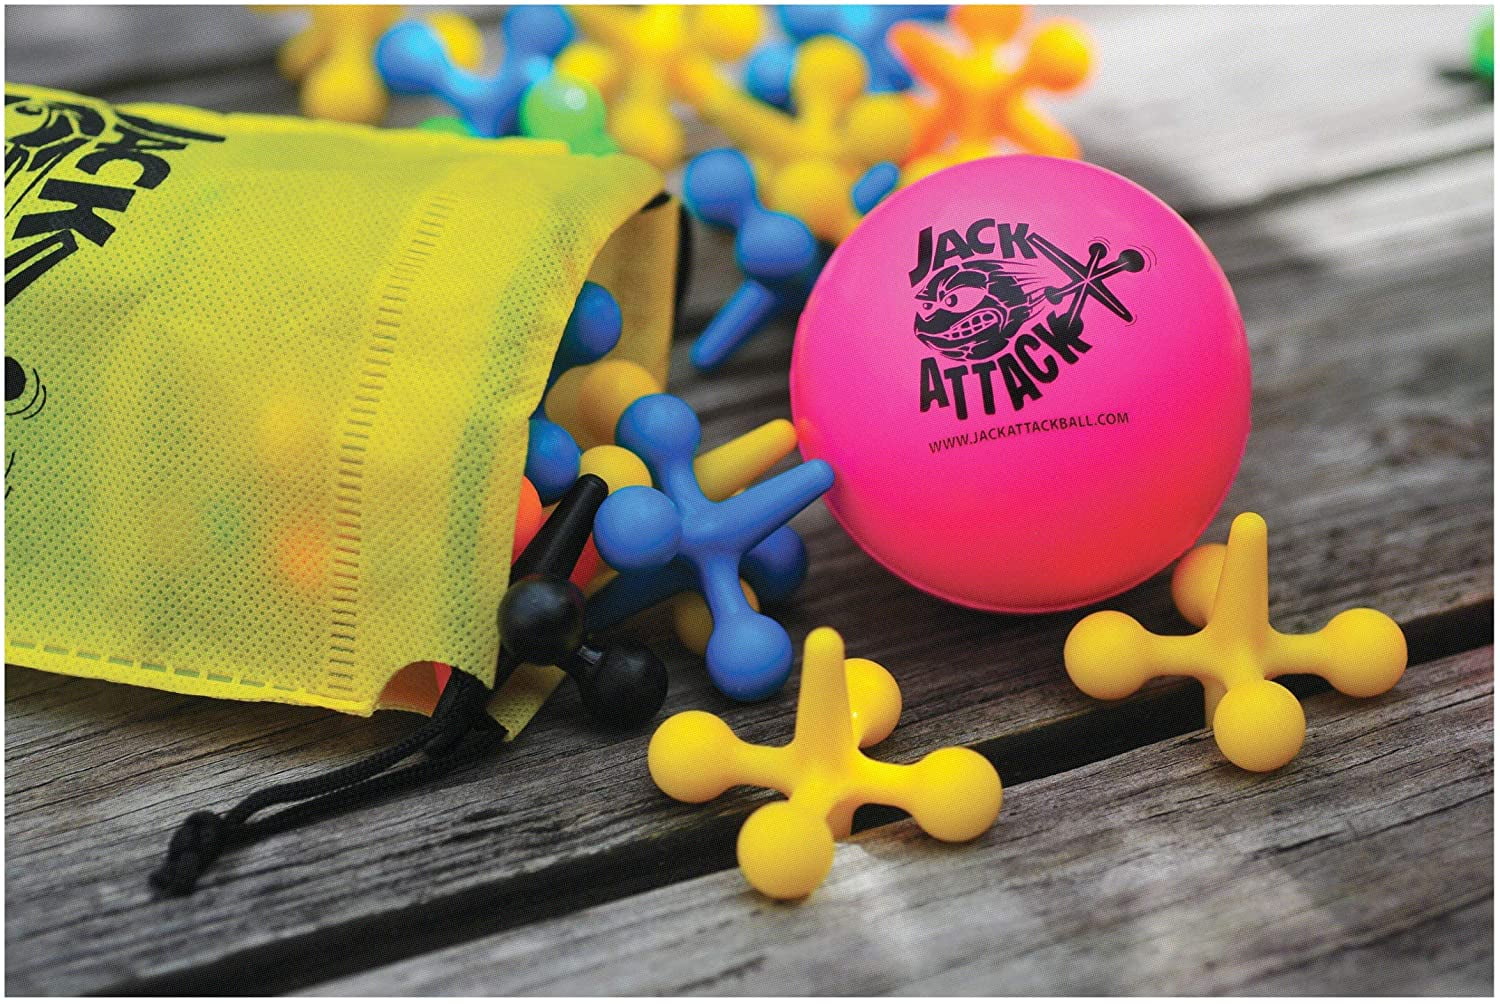 20 SETS OF NEW LARGE SIZE NEON JACKS AND RUBBER BOUNCE BALL GAME CLASSIC KID TOY 